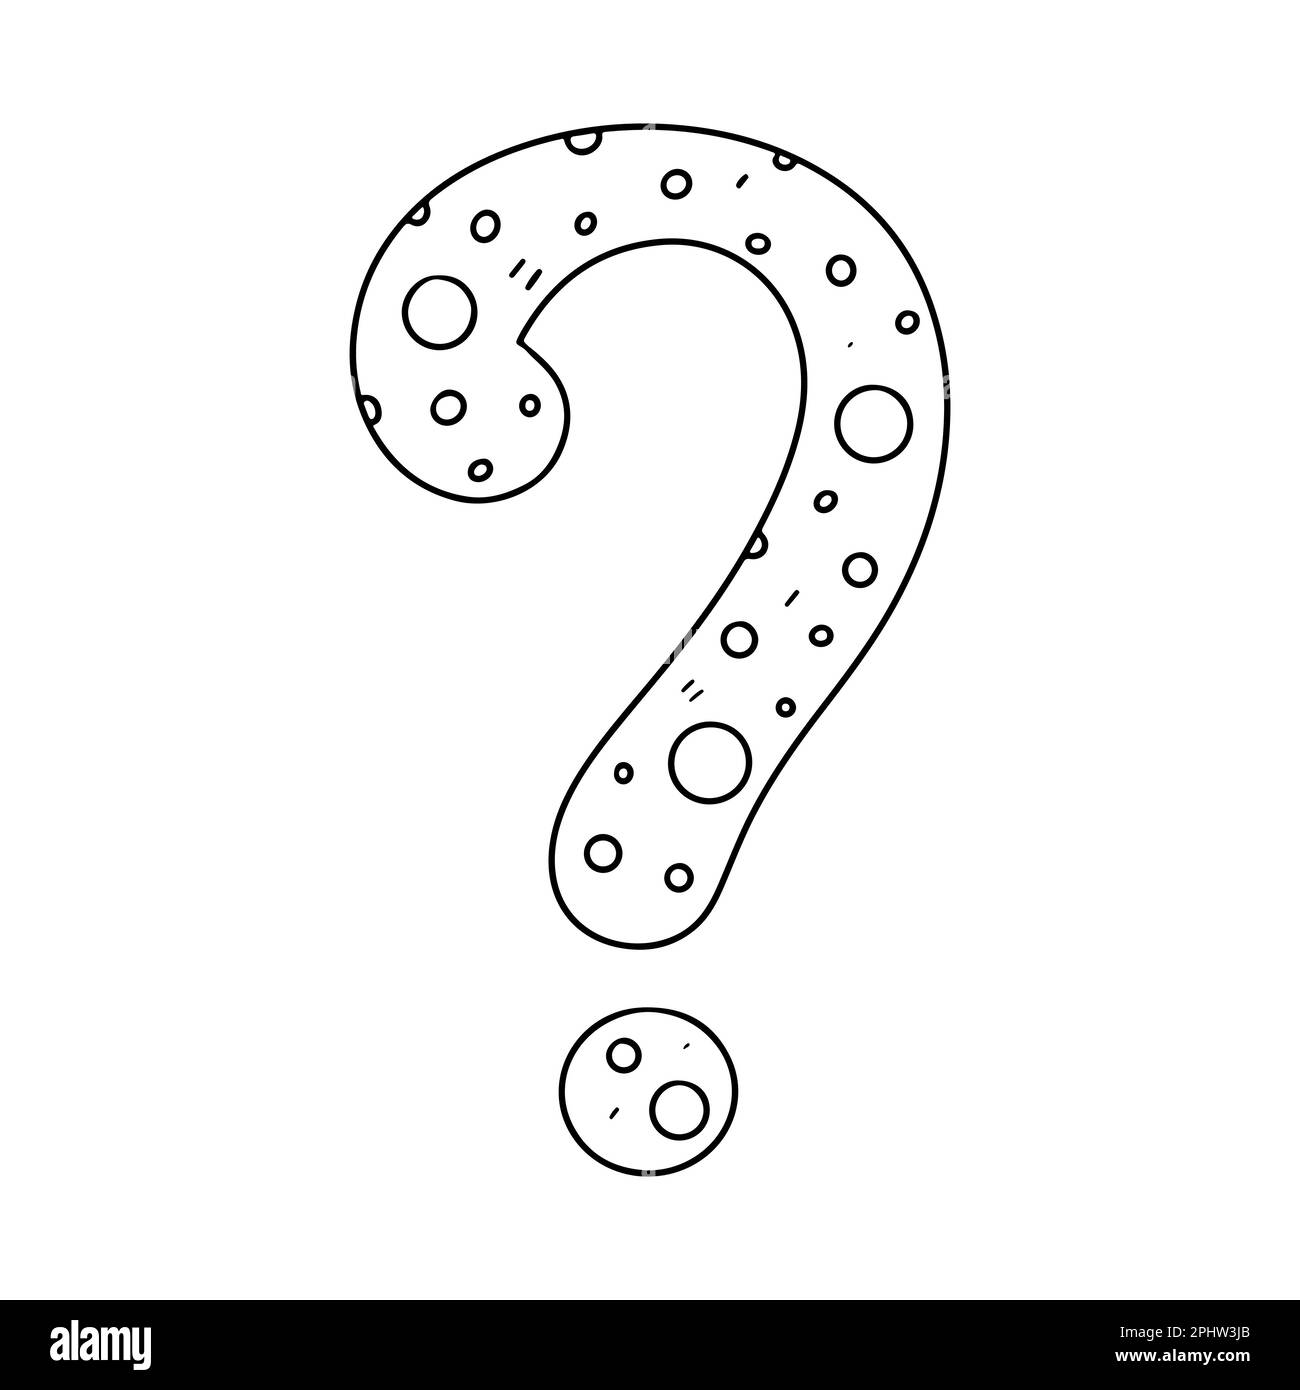 Question Mark with polka dot print in hand drawn doodle style. Vector illustration isolated on white background Stock Vector